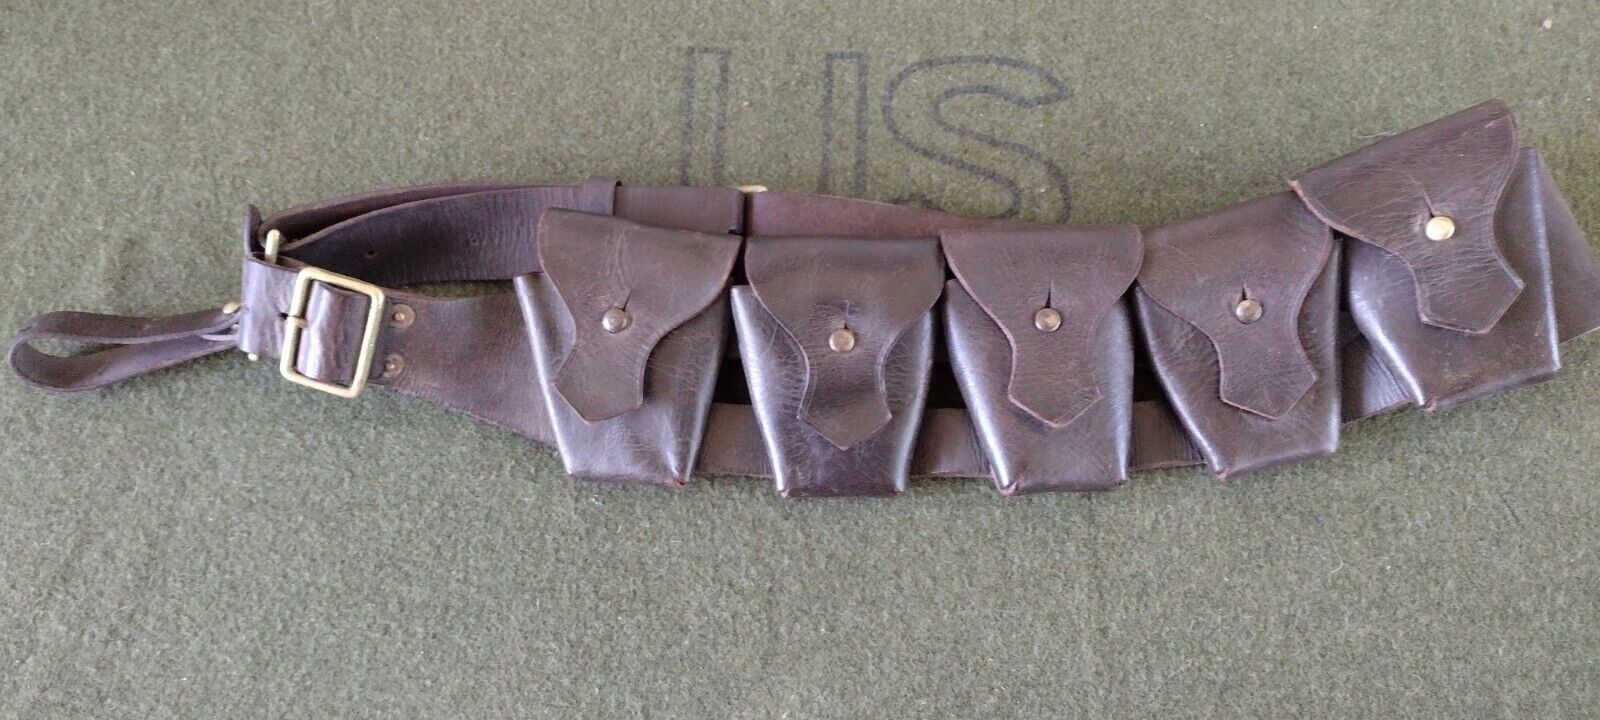 WW2 British Leather Bandolier No.1 SMLE Enfield Rifle WWII P1903 Cavalry Officer